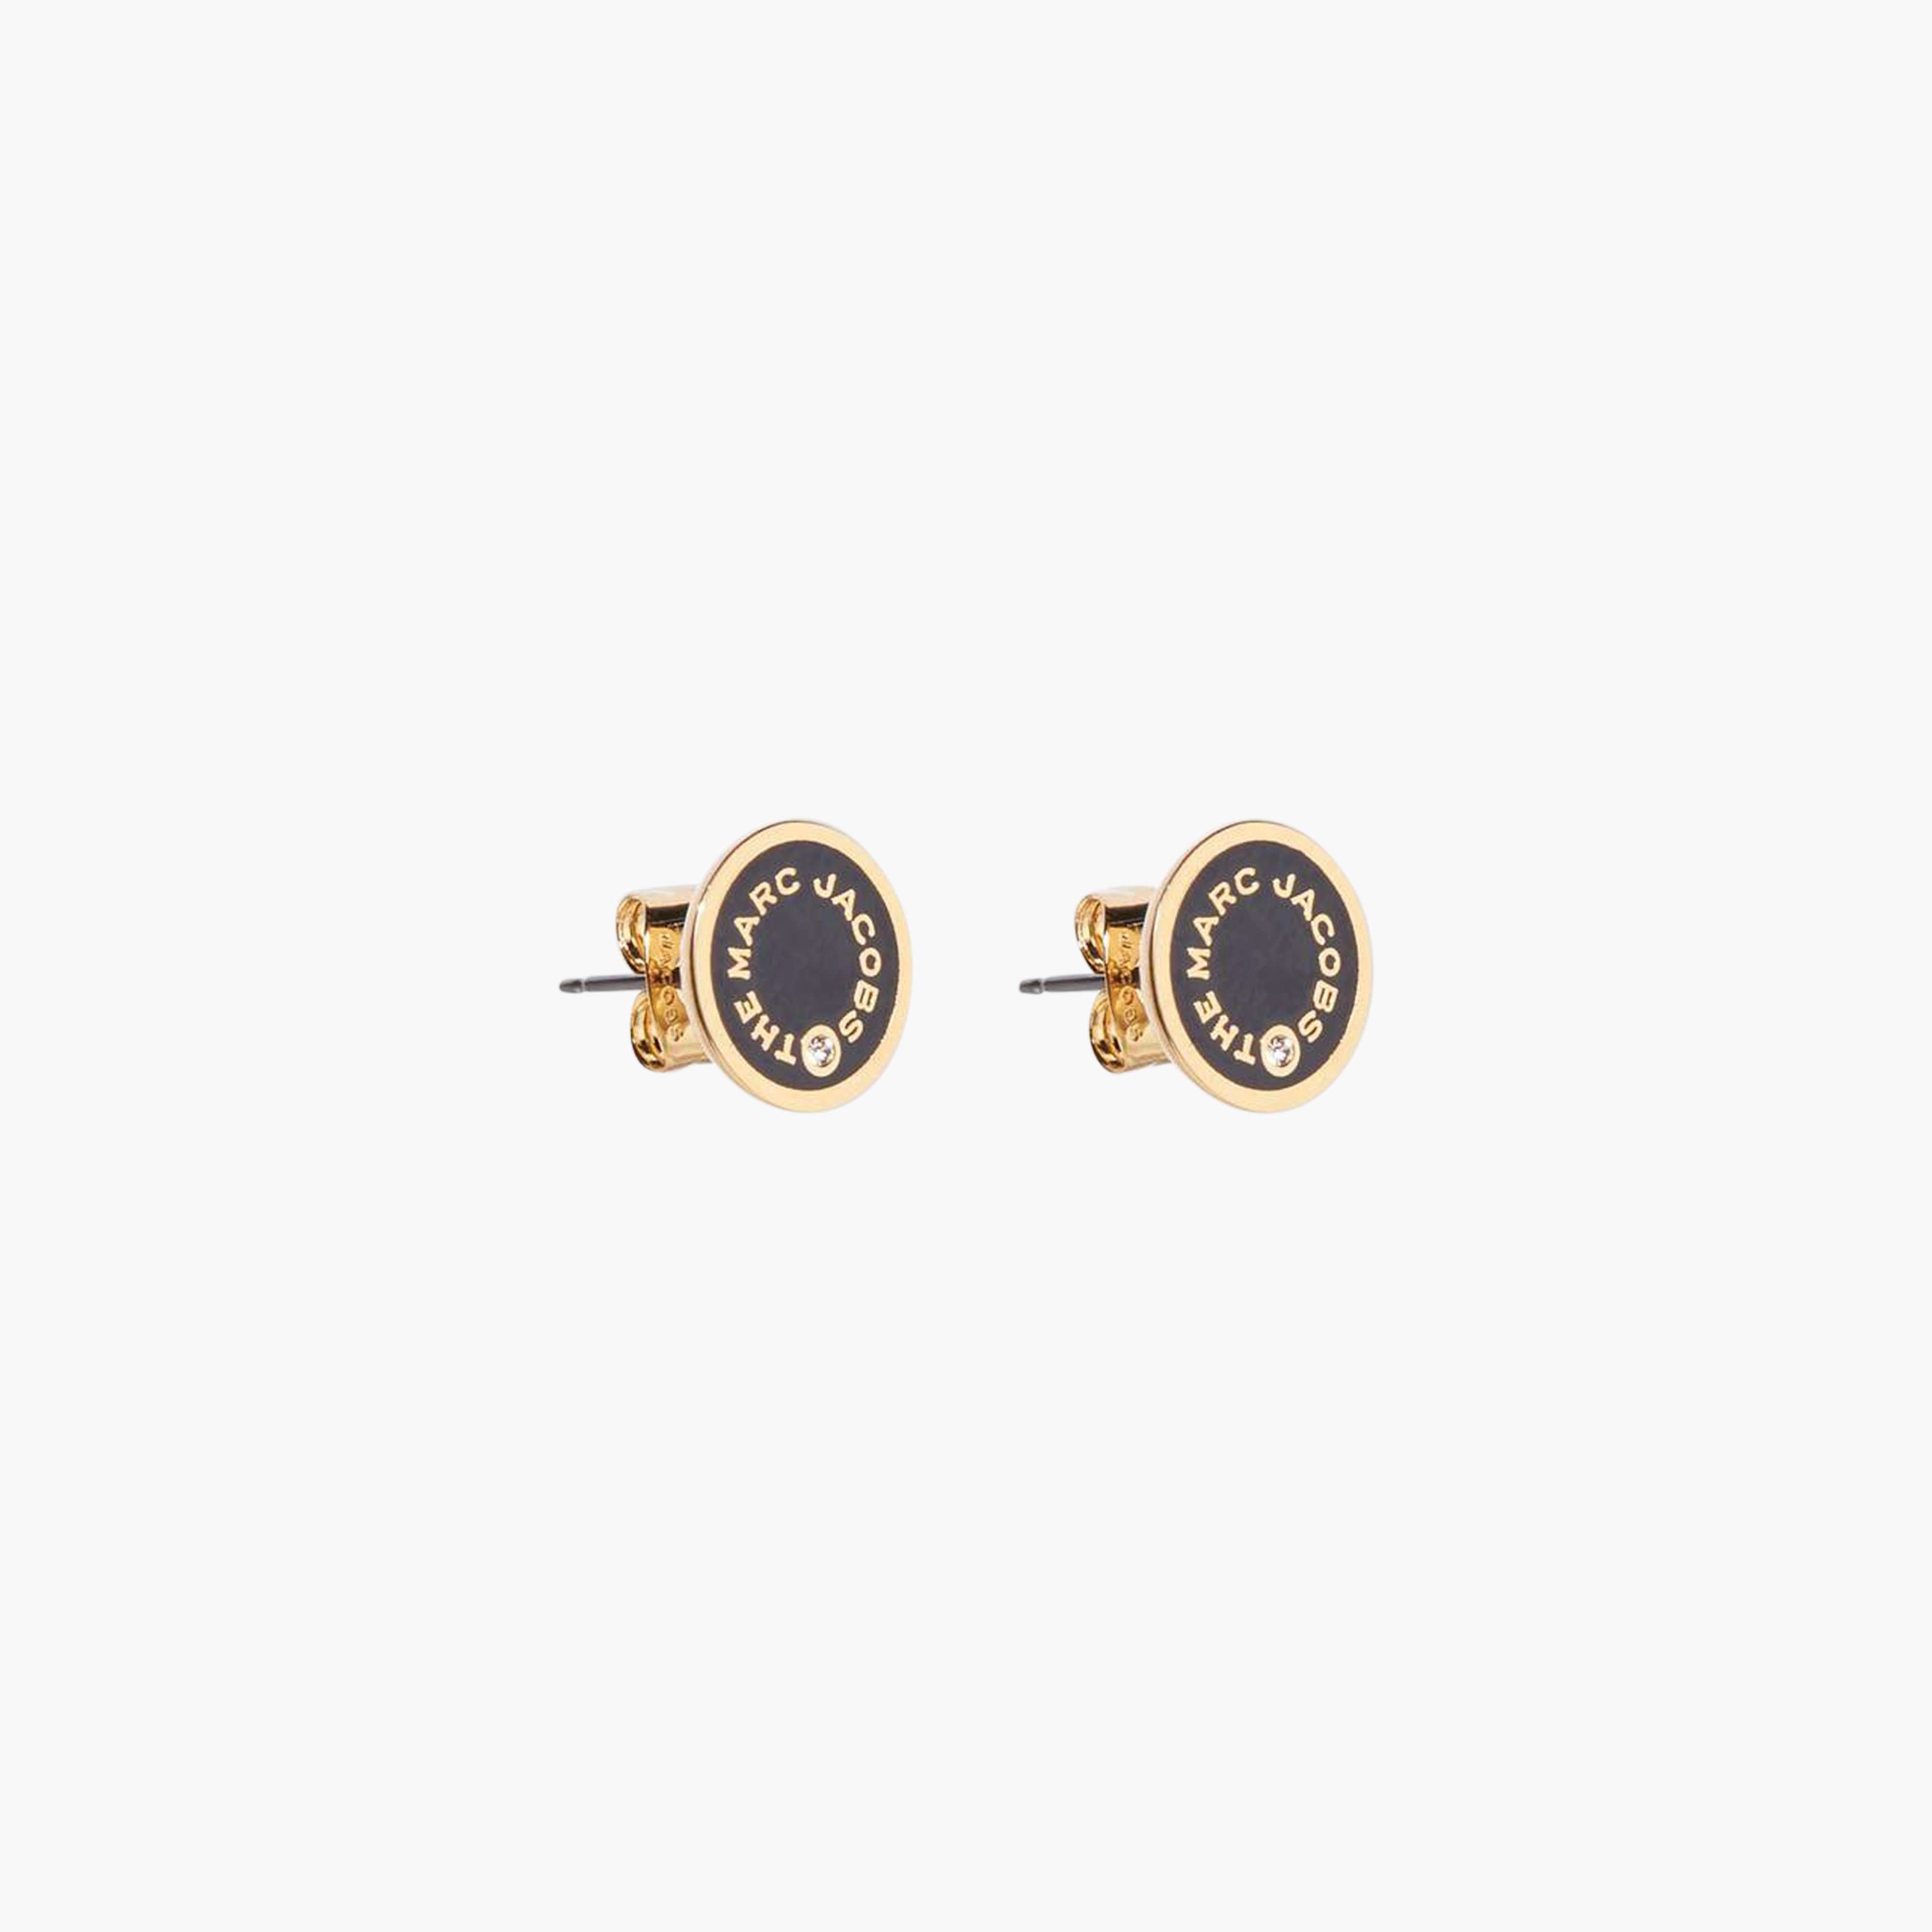 The Medallion Studs in Black/Gold